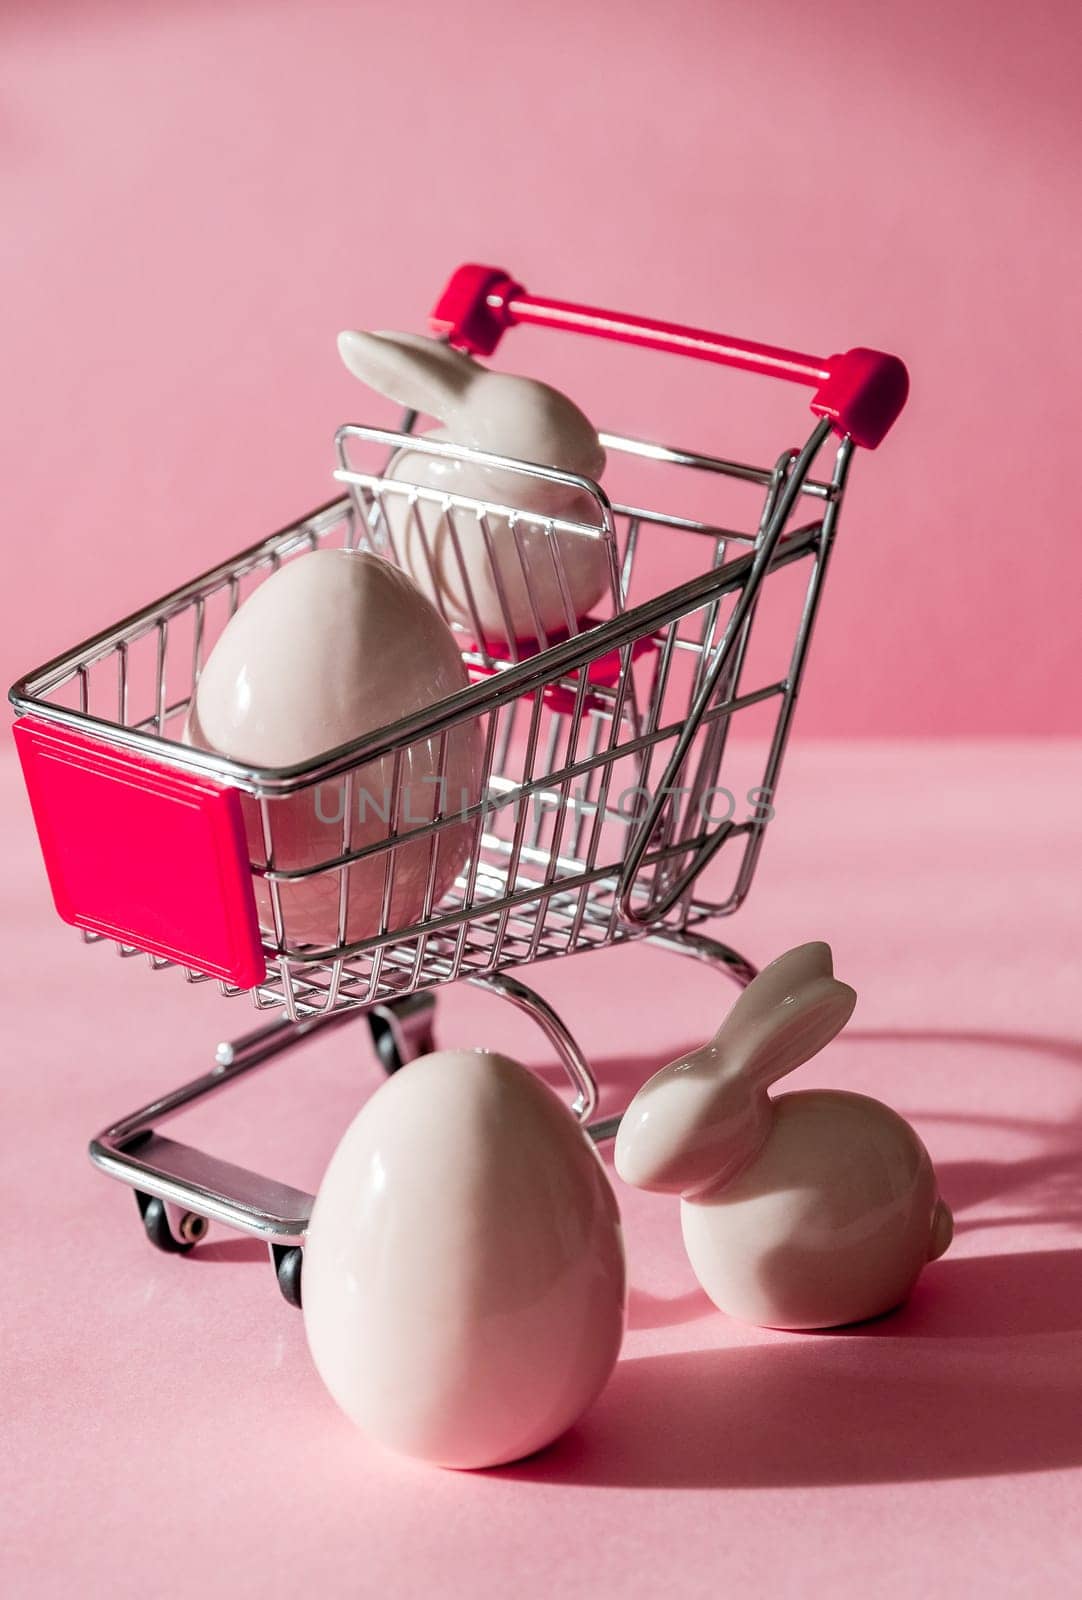 Porcelain figurines of Easter eggs and bunny with a mini shopping cart on a pink background, close-up side view.